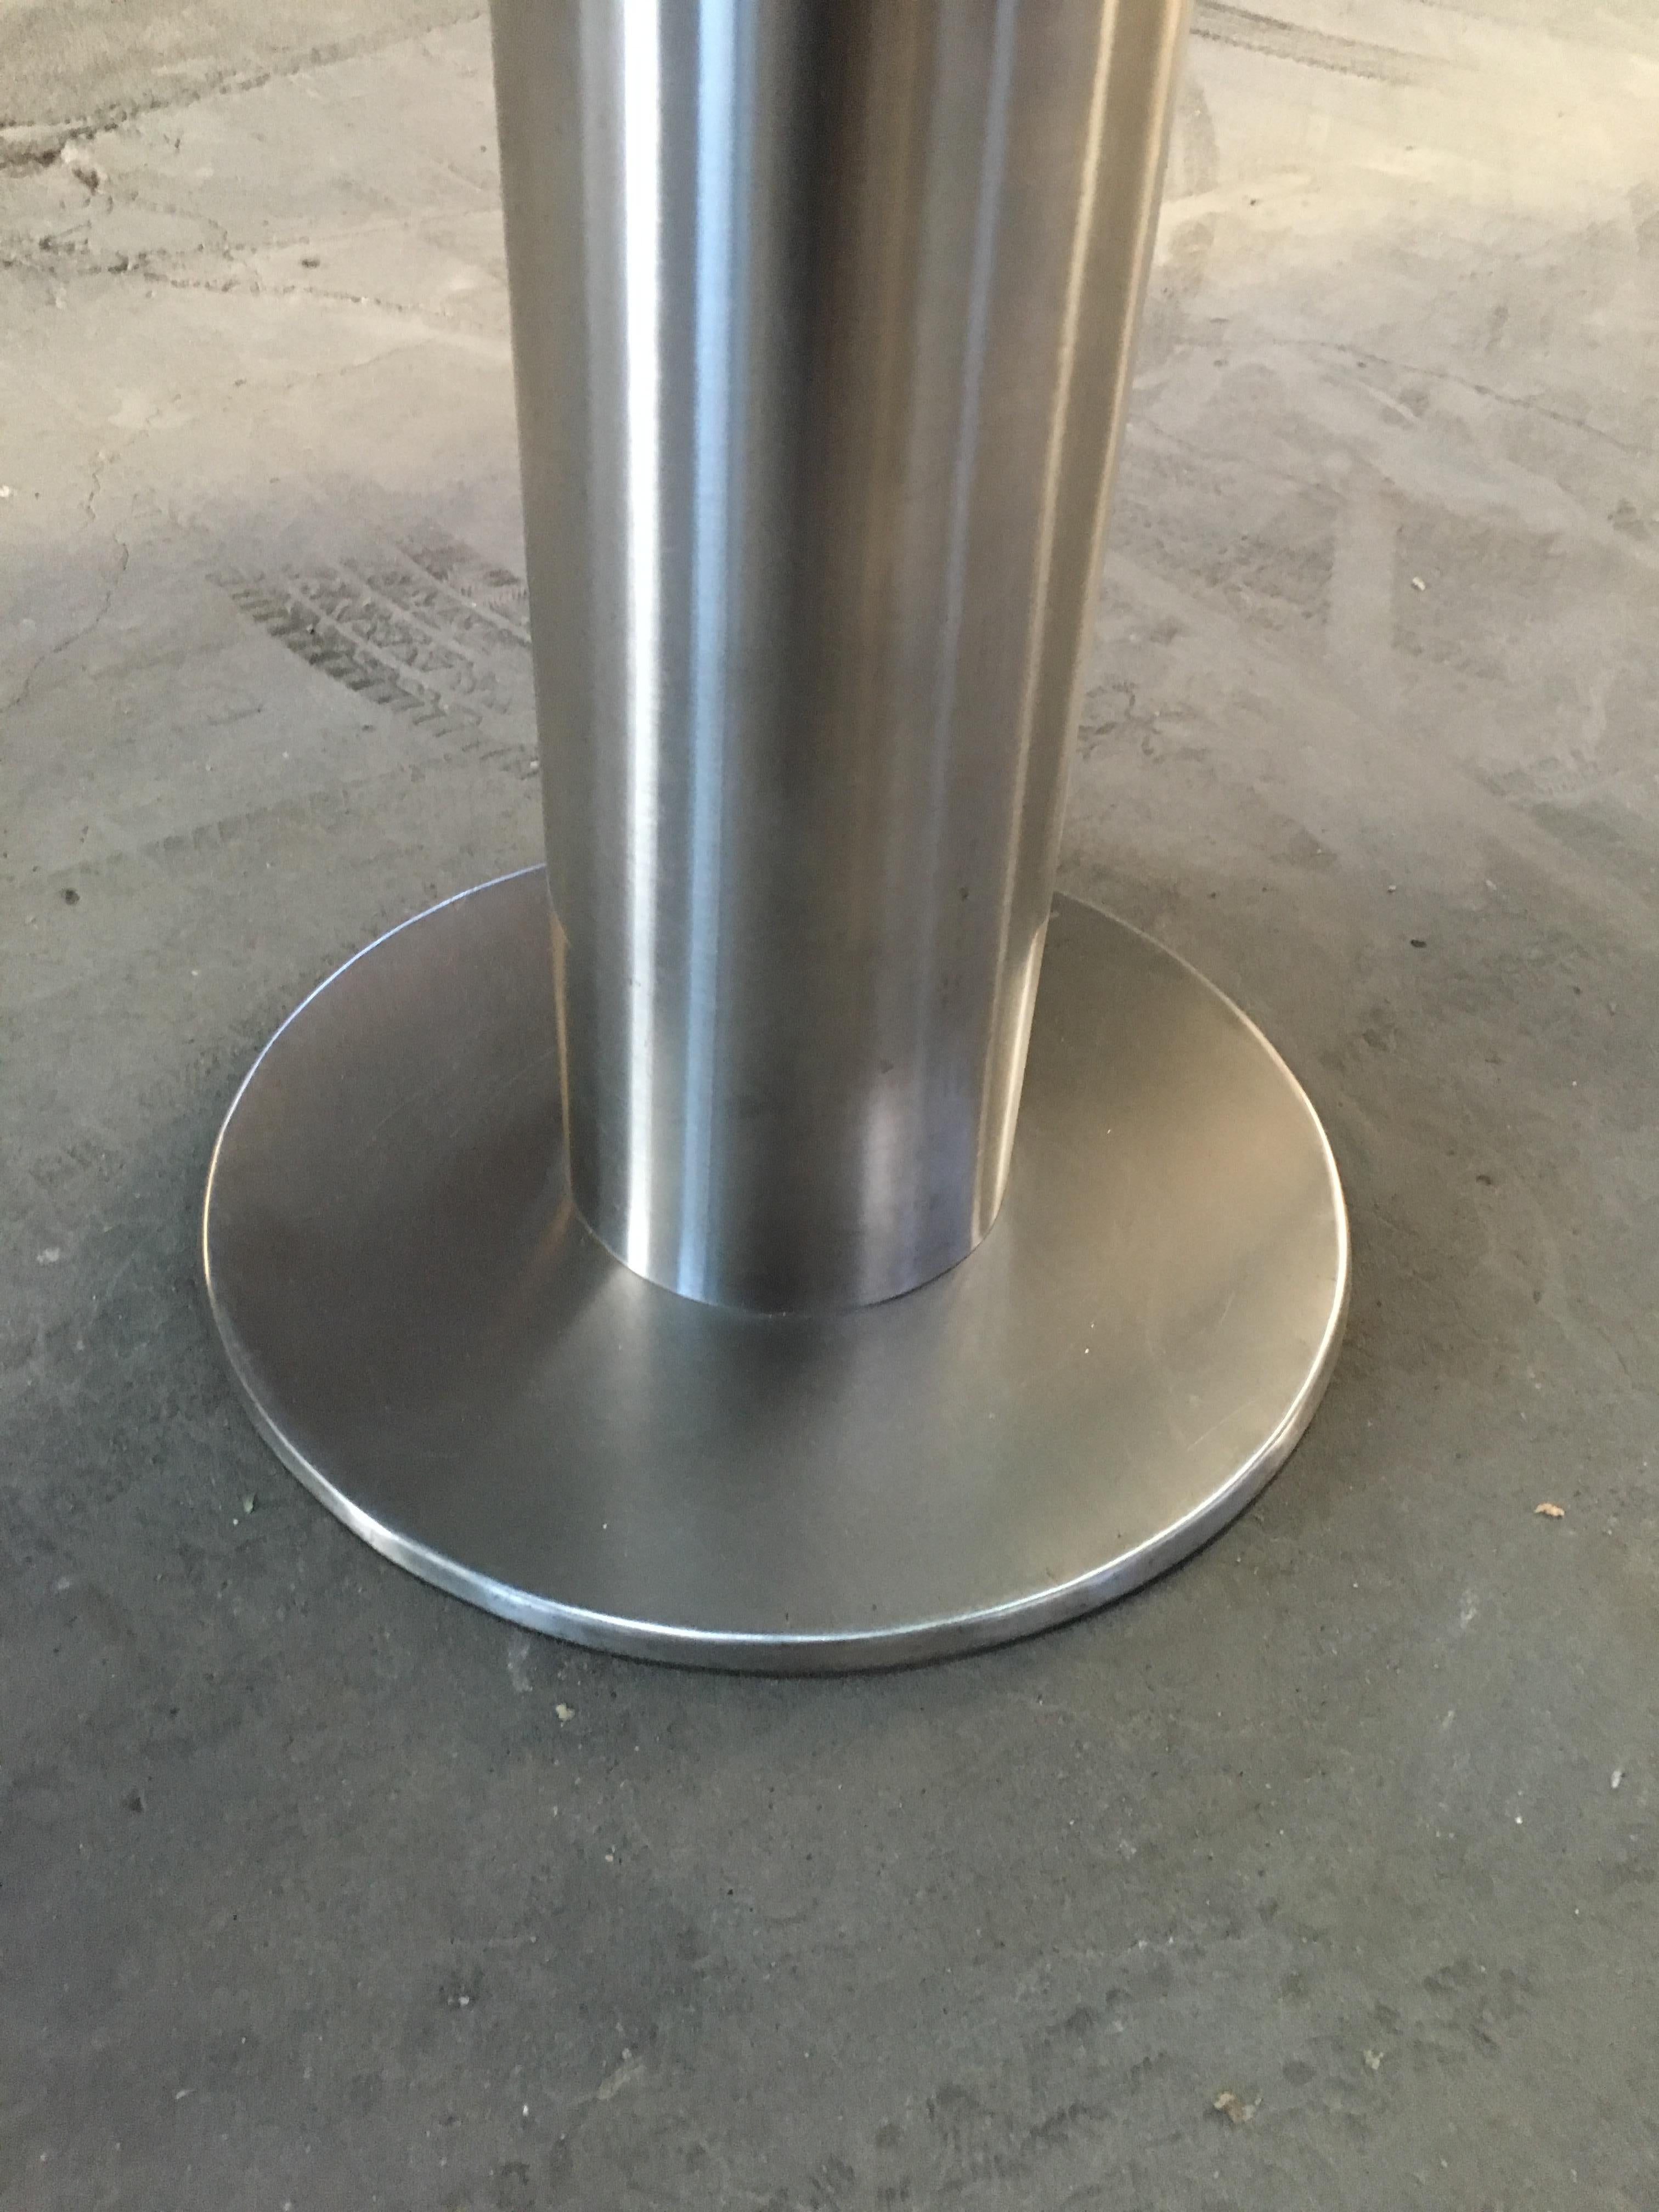 Mid-Century Modern Italian Chrome Table with Round Glass Top from 1970s For Sale 5